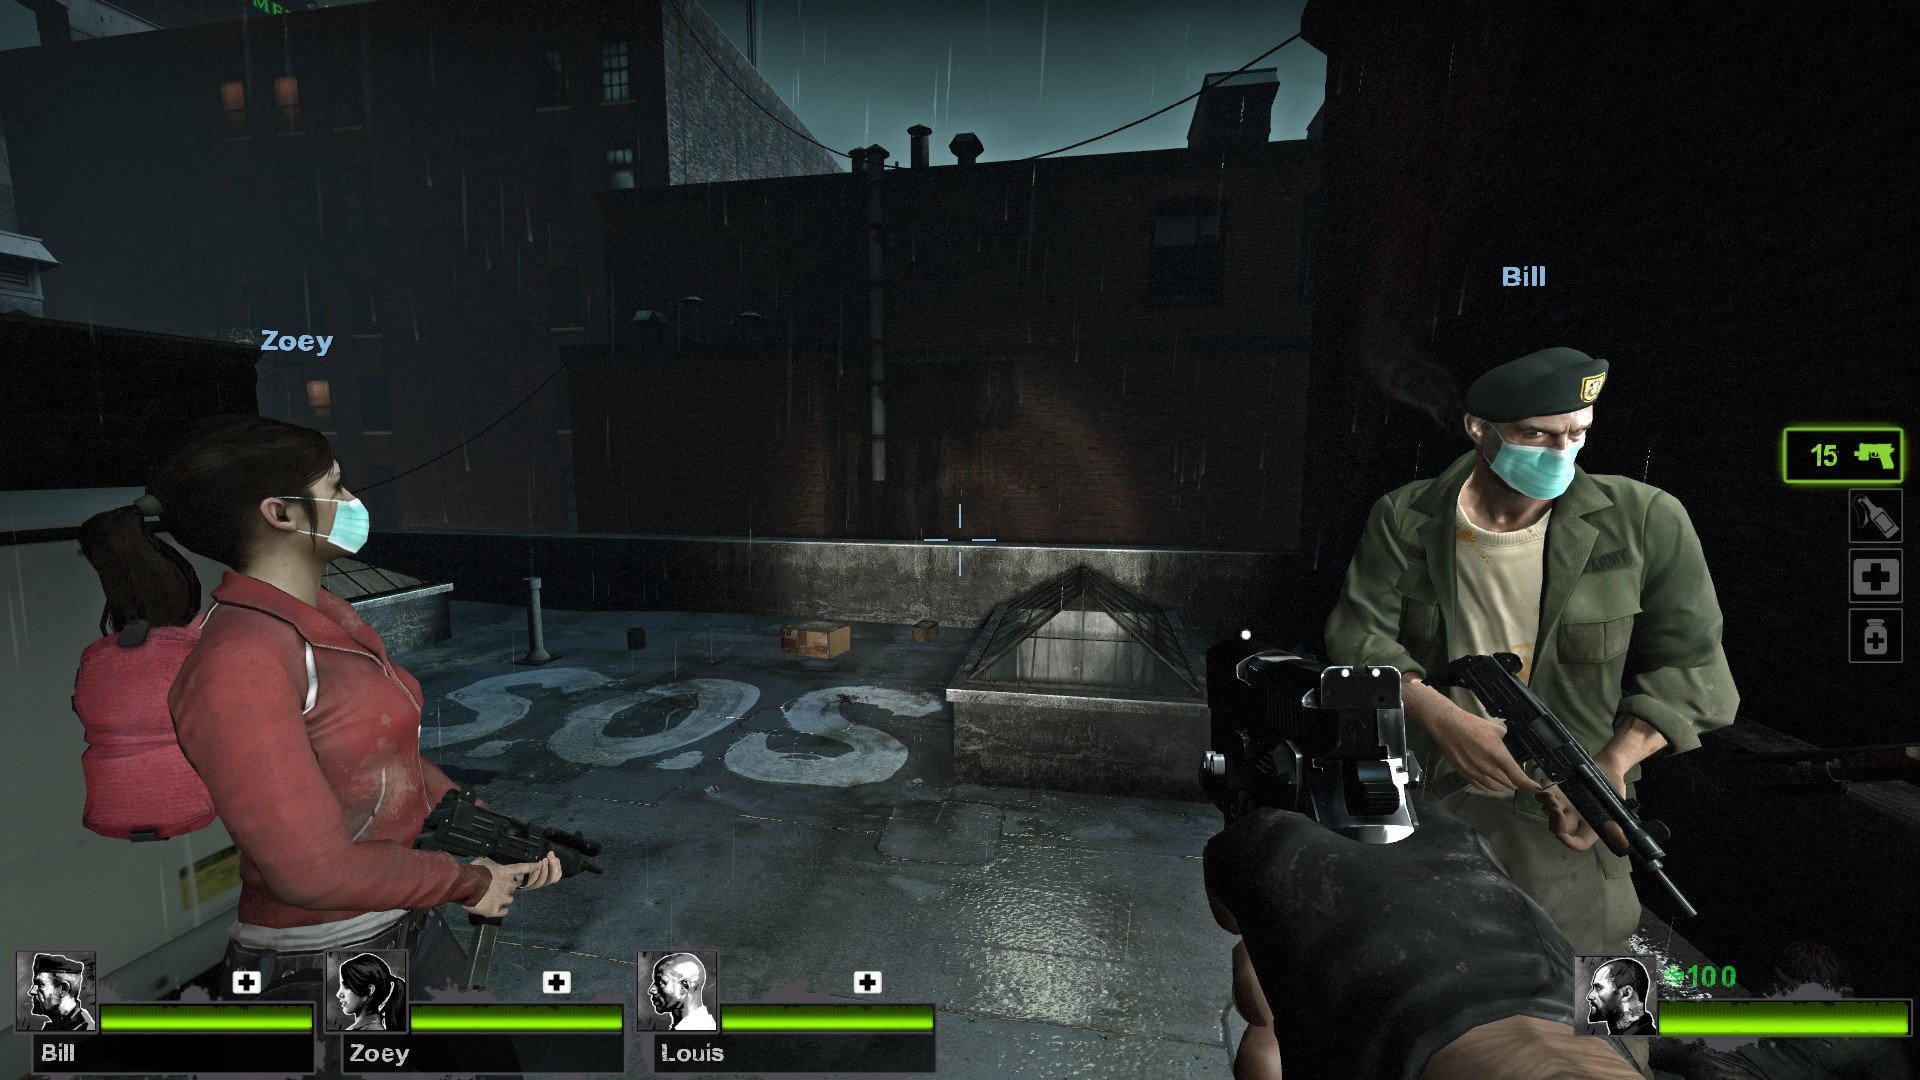 Two survivors on a rooftop, facemasks on, an SOS painted on the floor